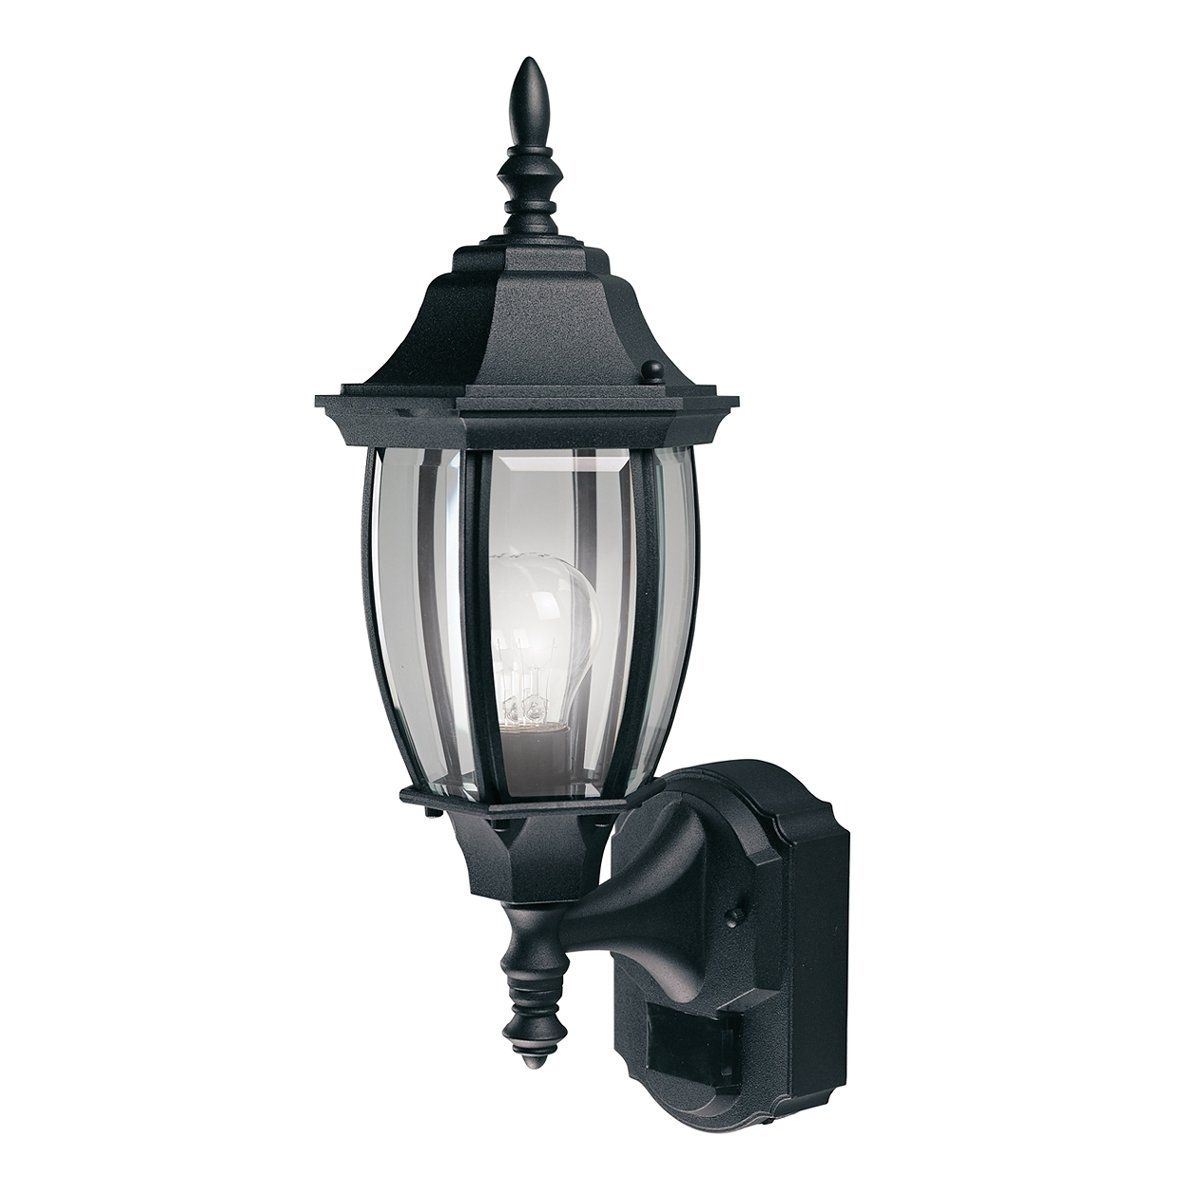 Furniture : Heath Zenith Motion Activated Alexandria Style With Made In Usa Outdoor Wall Lighting (View 5 of 15)